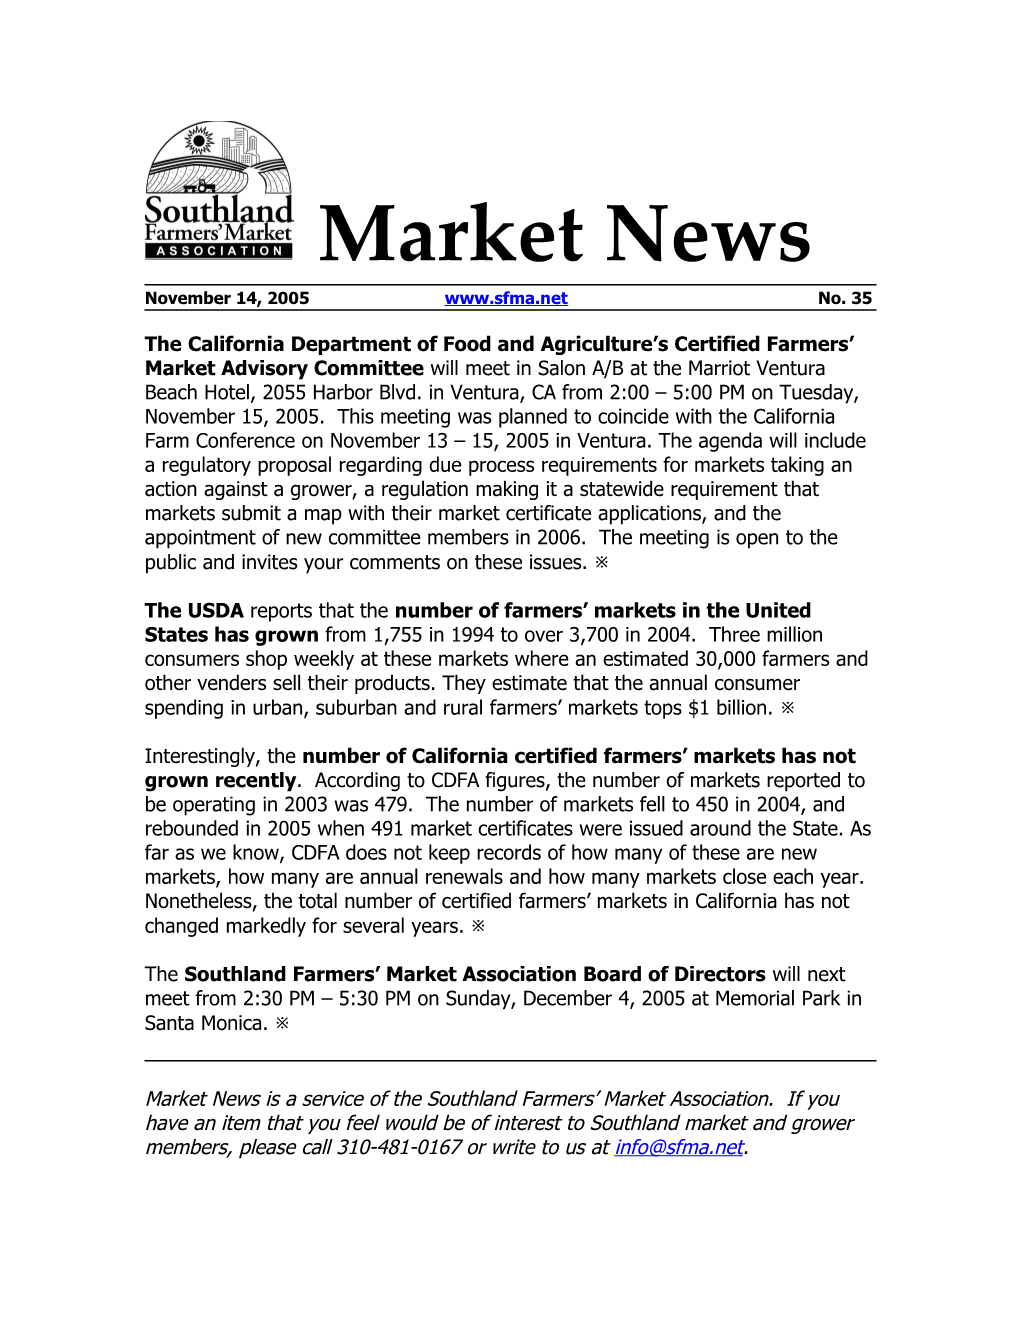 The California Department of Food and Agriculture S Certified Farmers Market Advisory